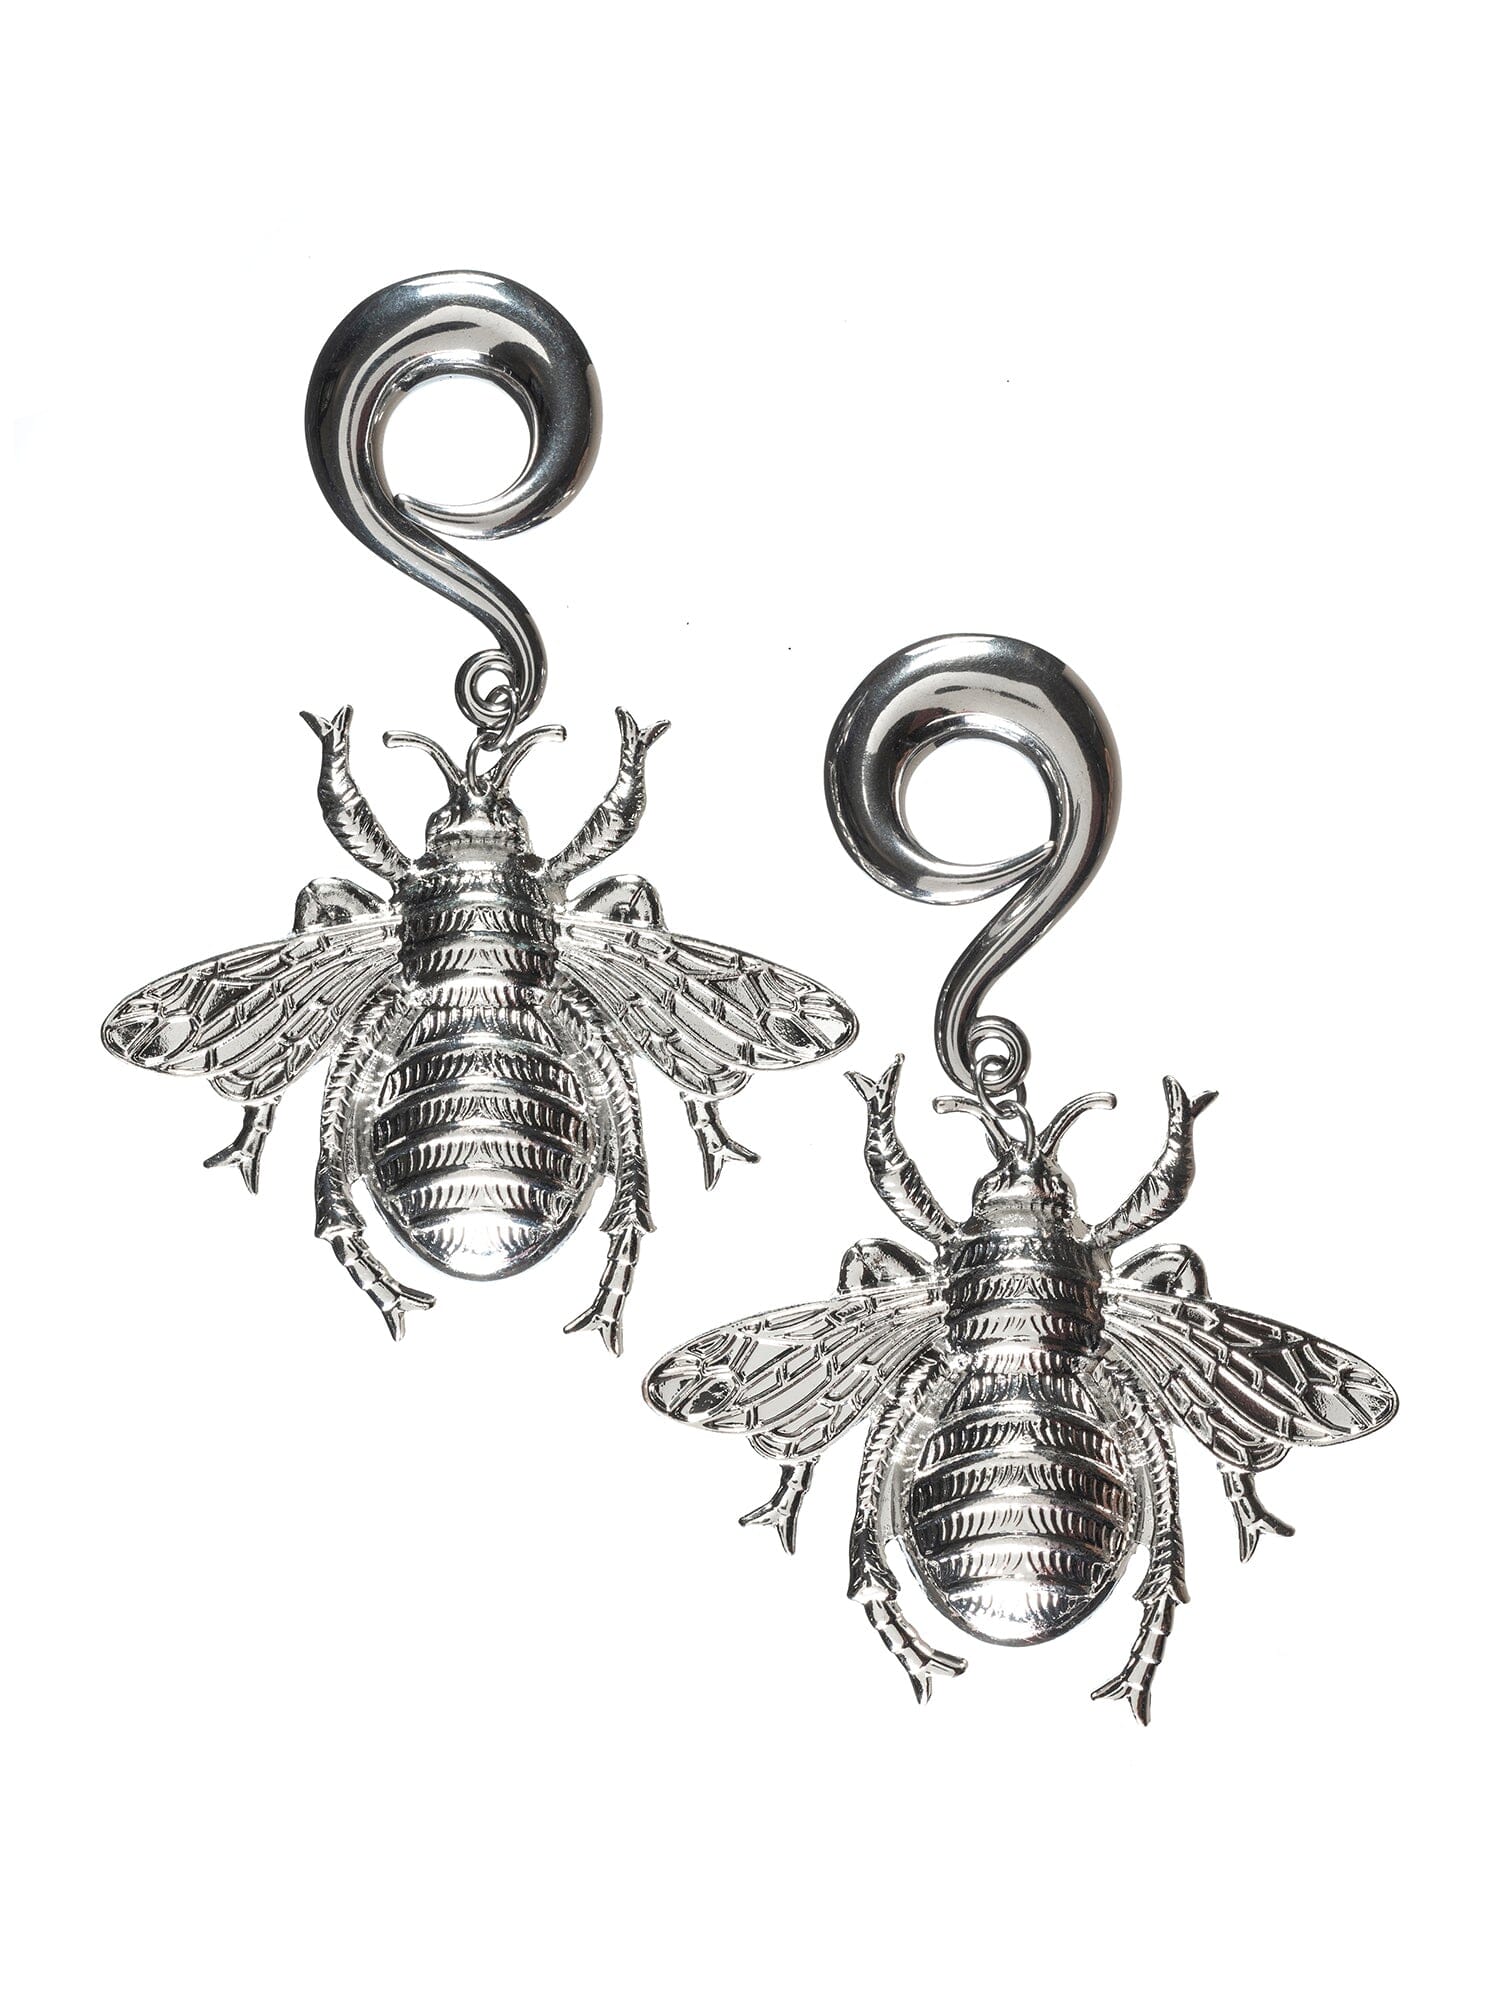 Bumble Bee Curled Hook Hangers